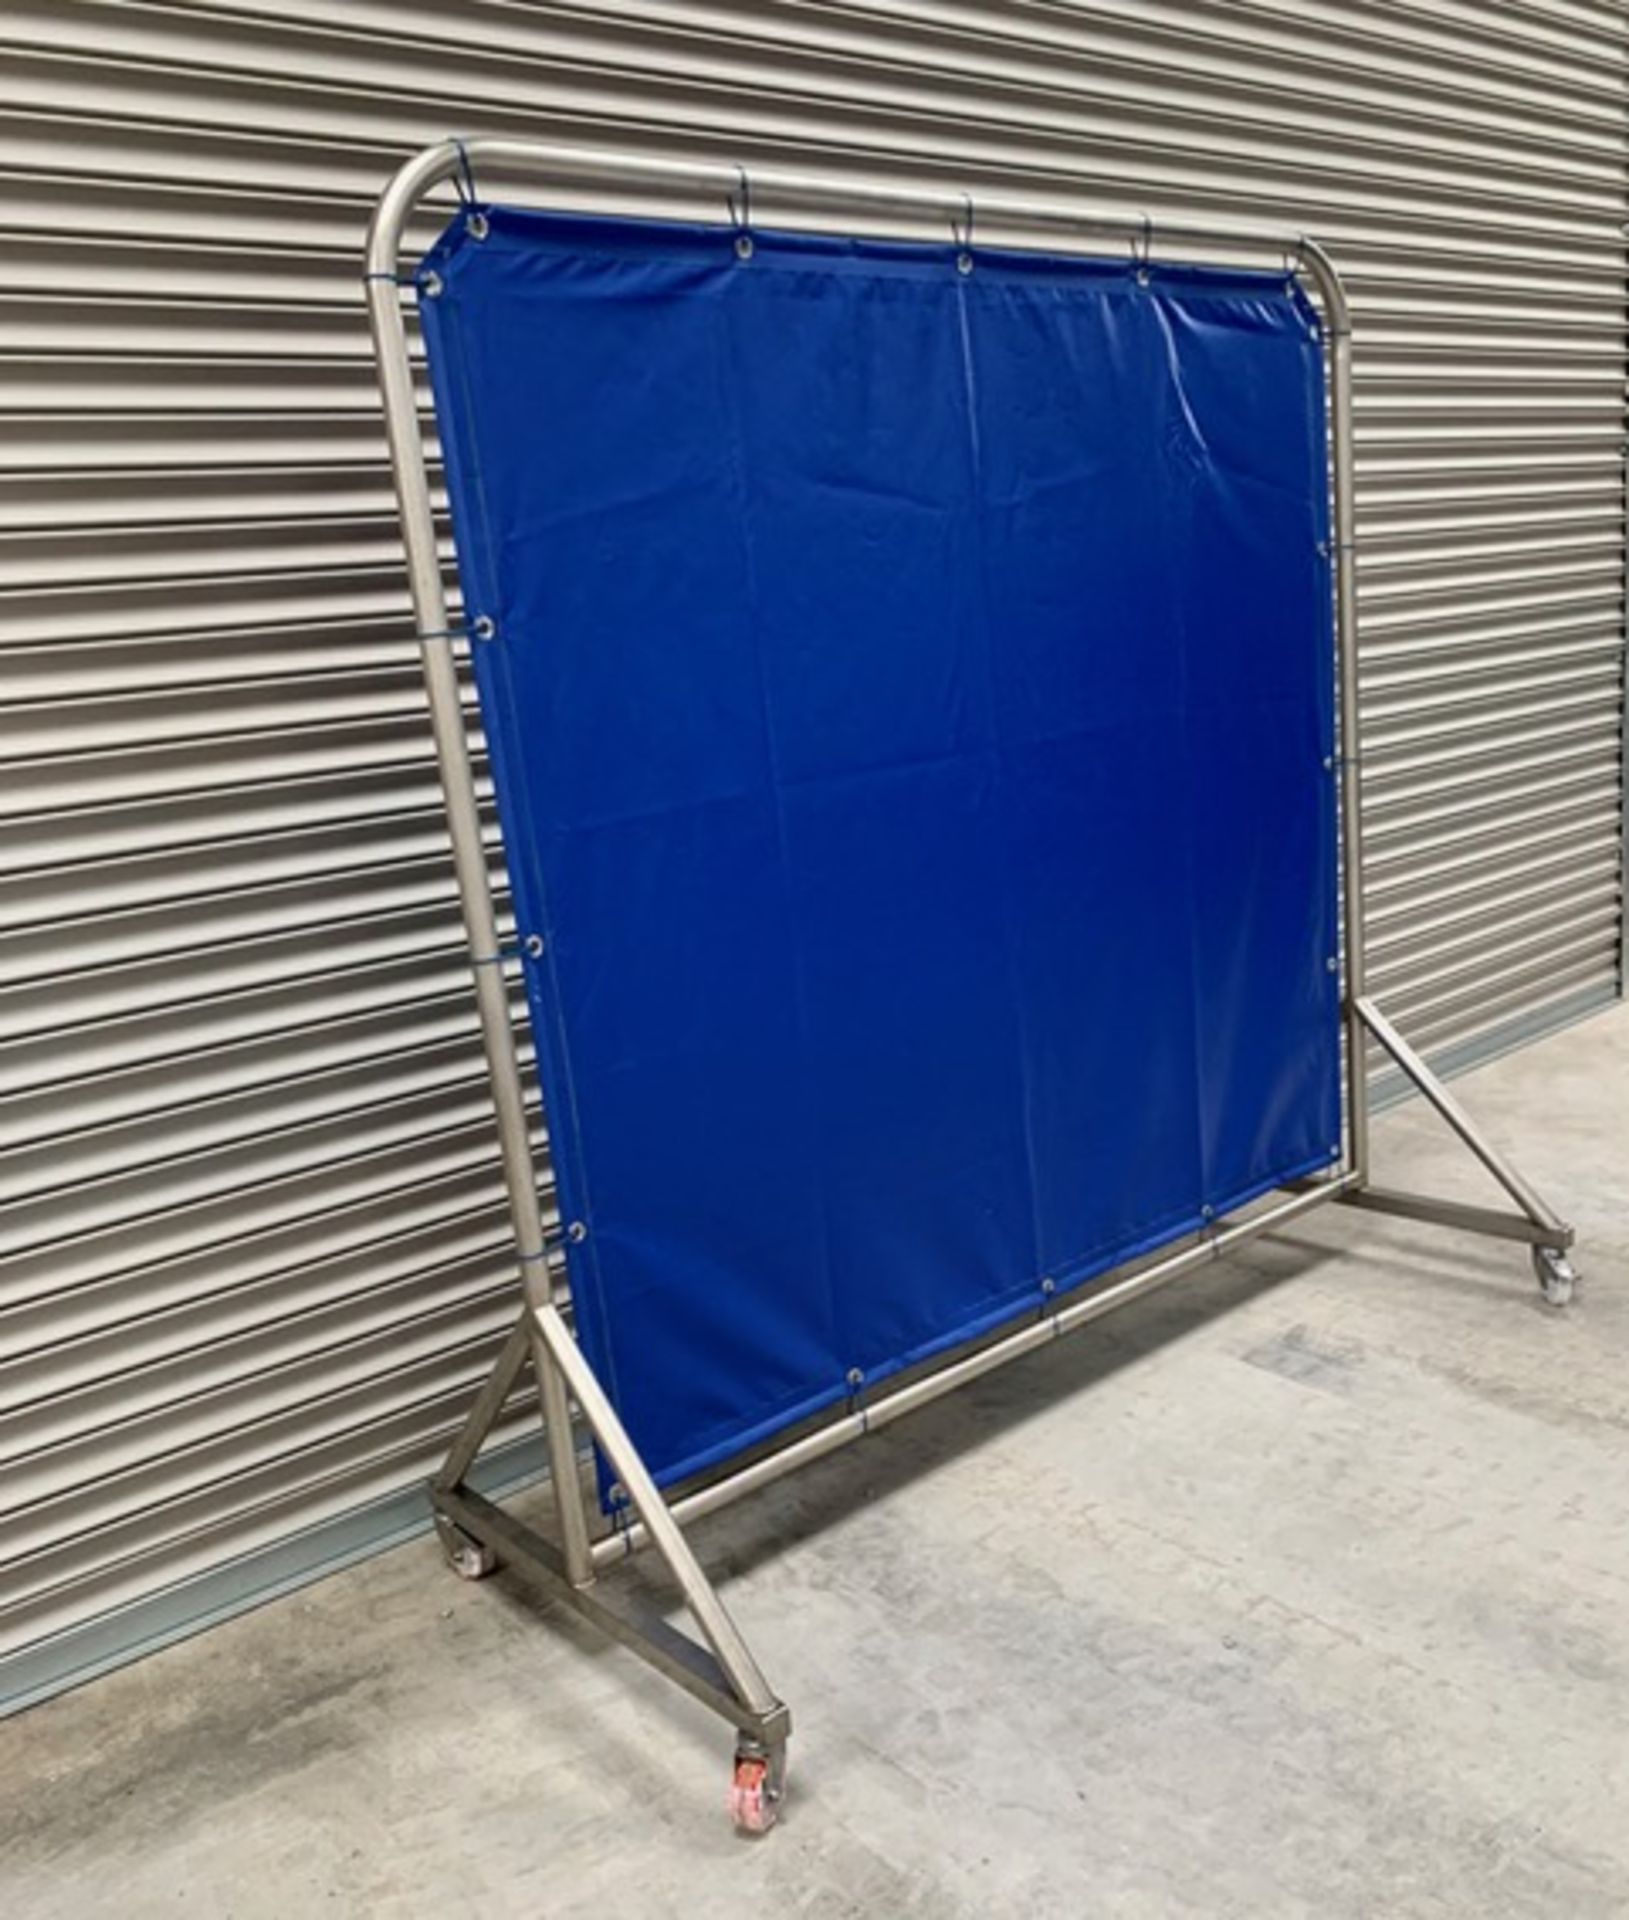 2 X SYSPAL S/S MOBILE PARTITION/WASH SCREENS. - Image 2 of 4